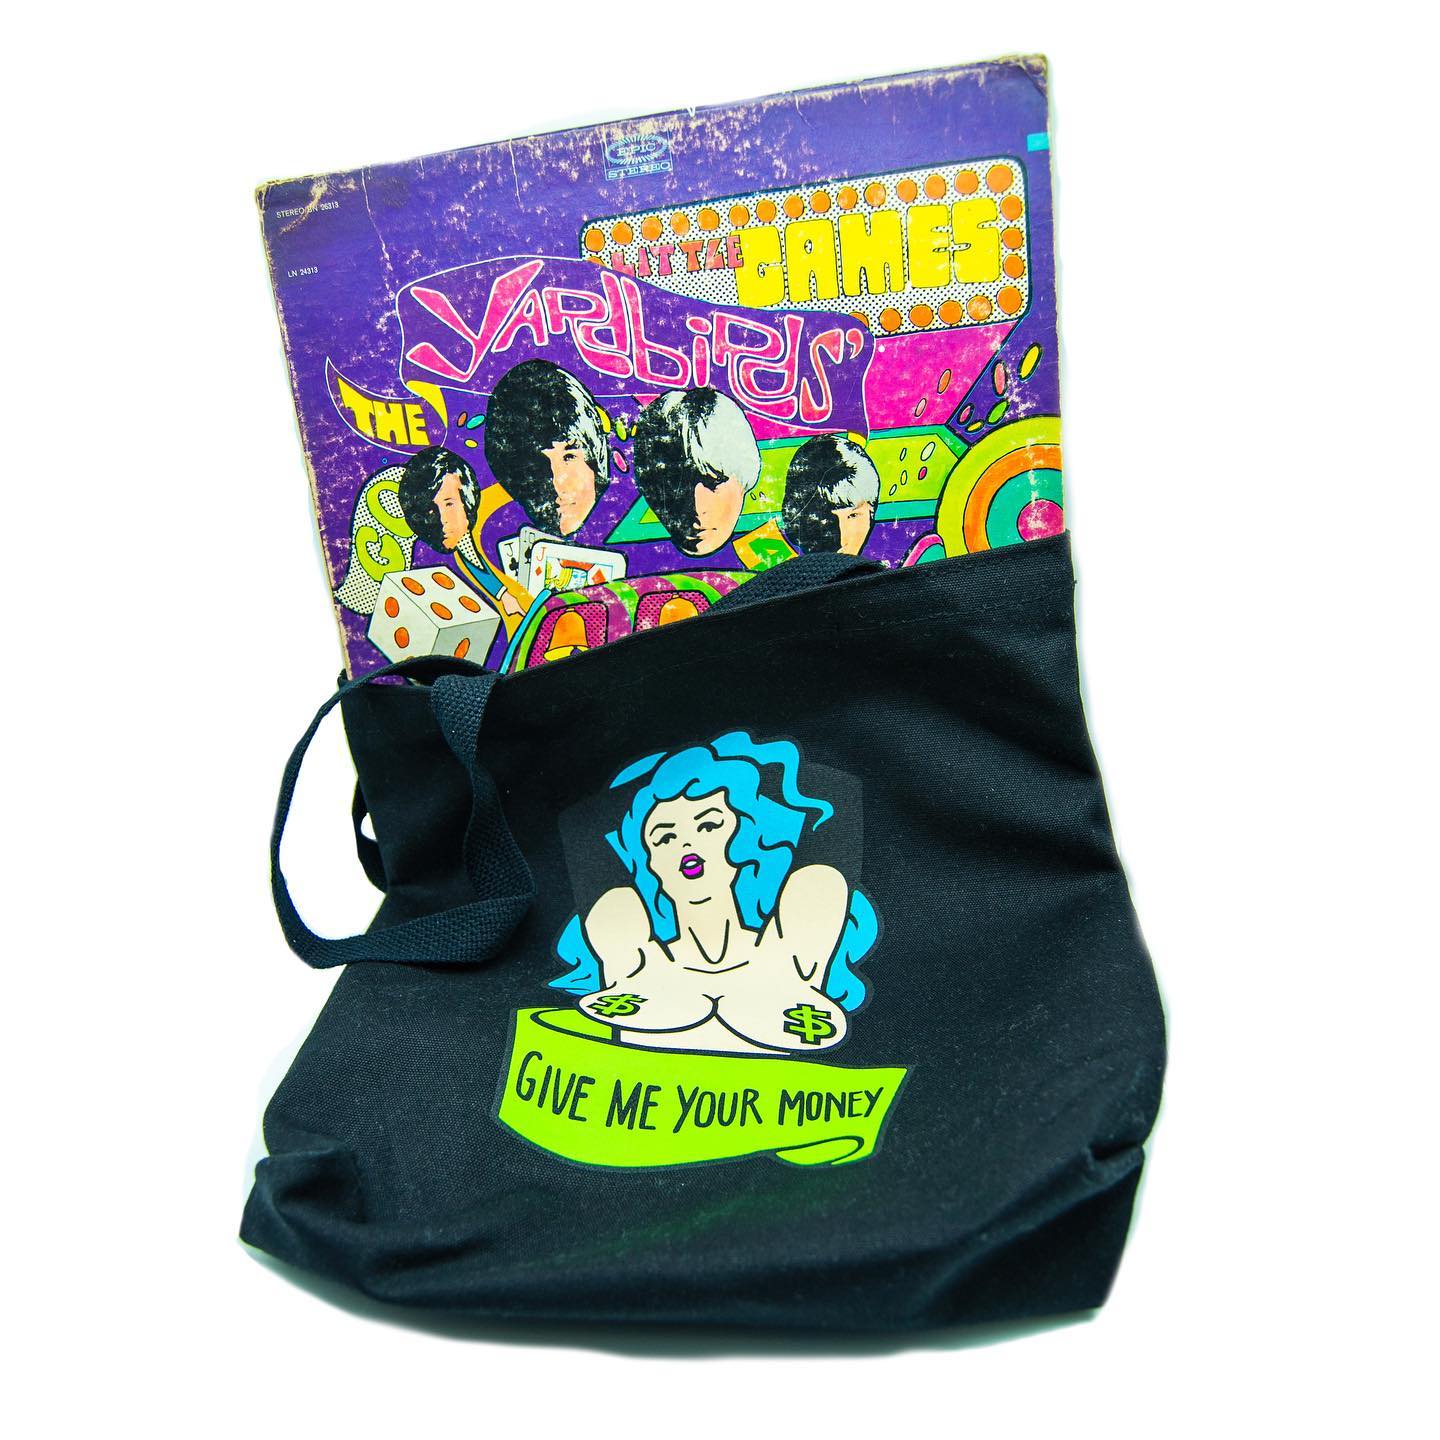 A black canvas tote bag, featuring the bust of a topless, blue haired woman wearing green dollar sign pasties. Below her is a banner that says "GIVE ME YOUR MONEY". The bag contains a Yardbirds record.